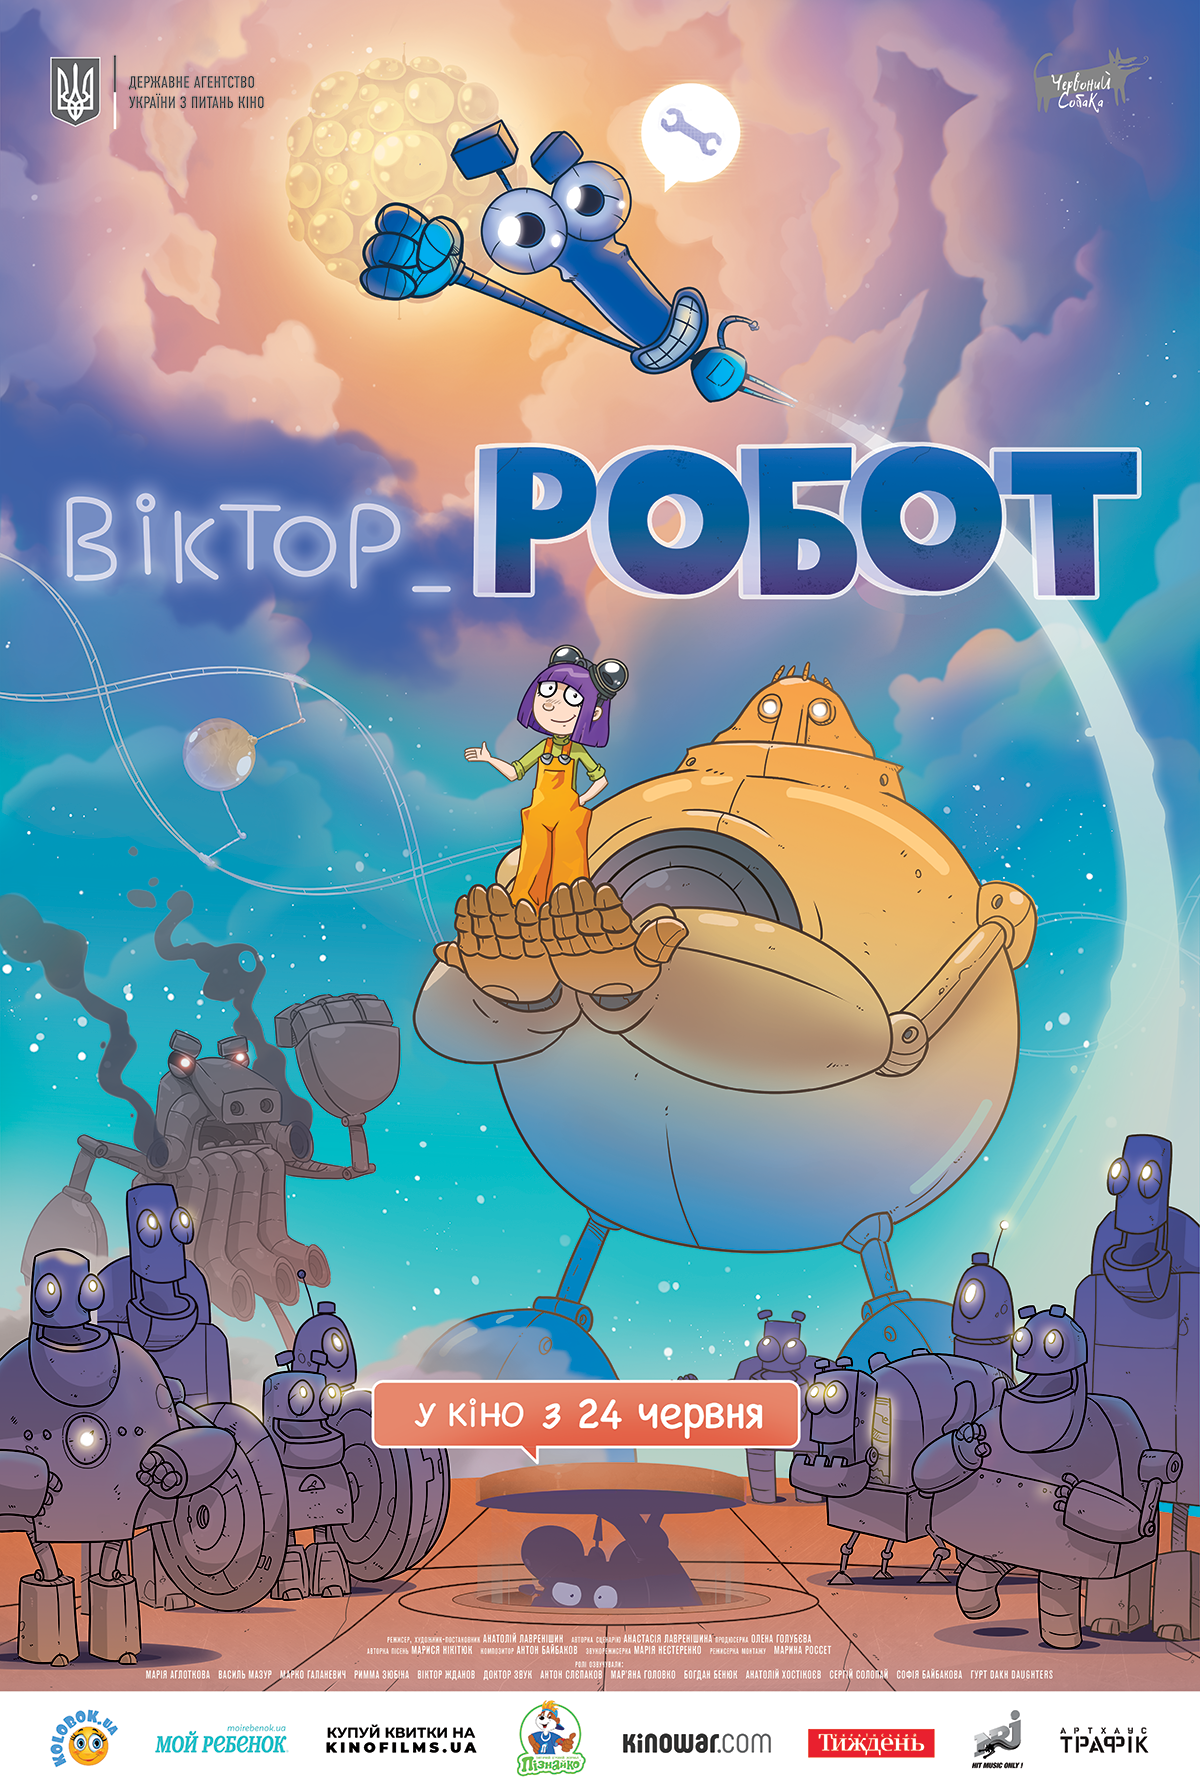 Movie 'VICTOR_ROBOT' Cover